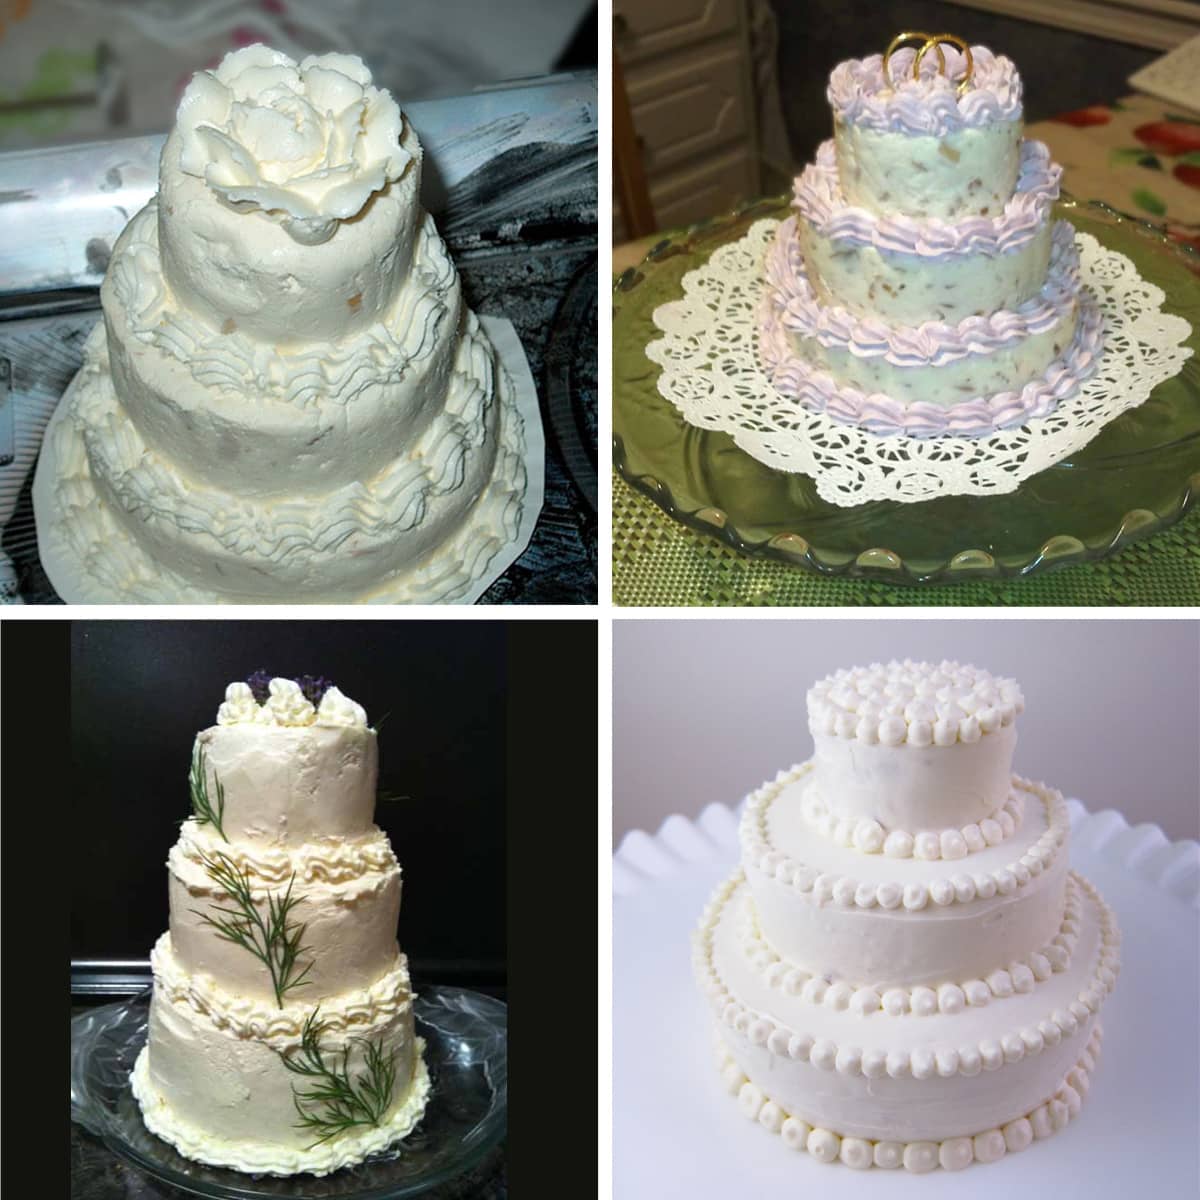 4 cheese ball wedding cakes created by Hungry Happenings' readers.